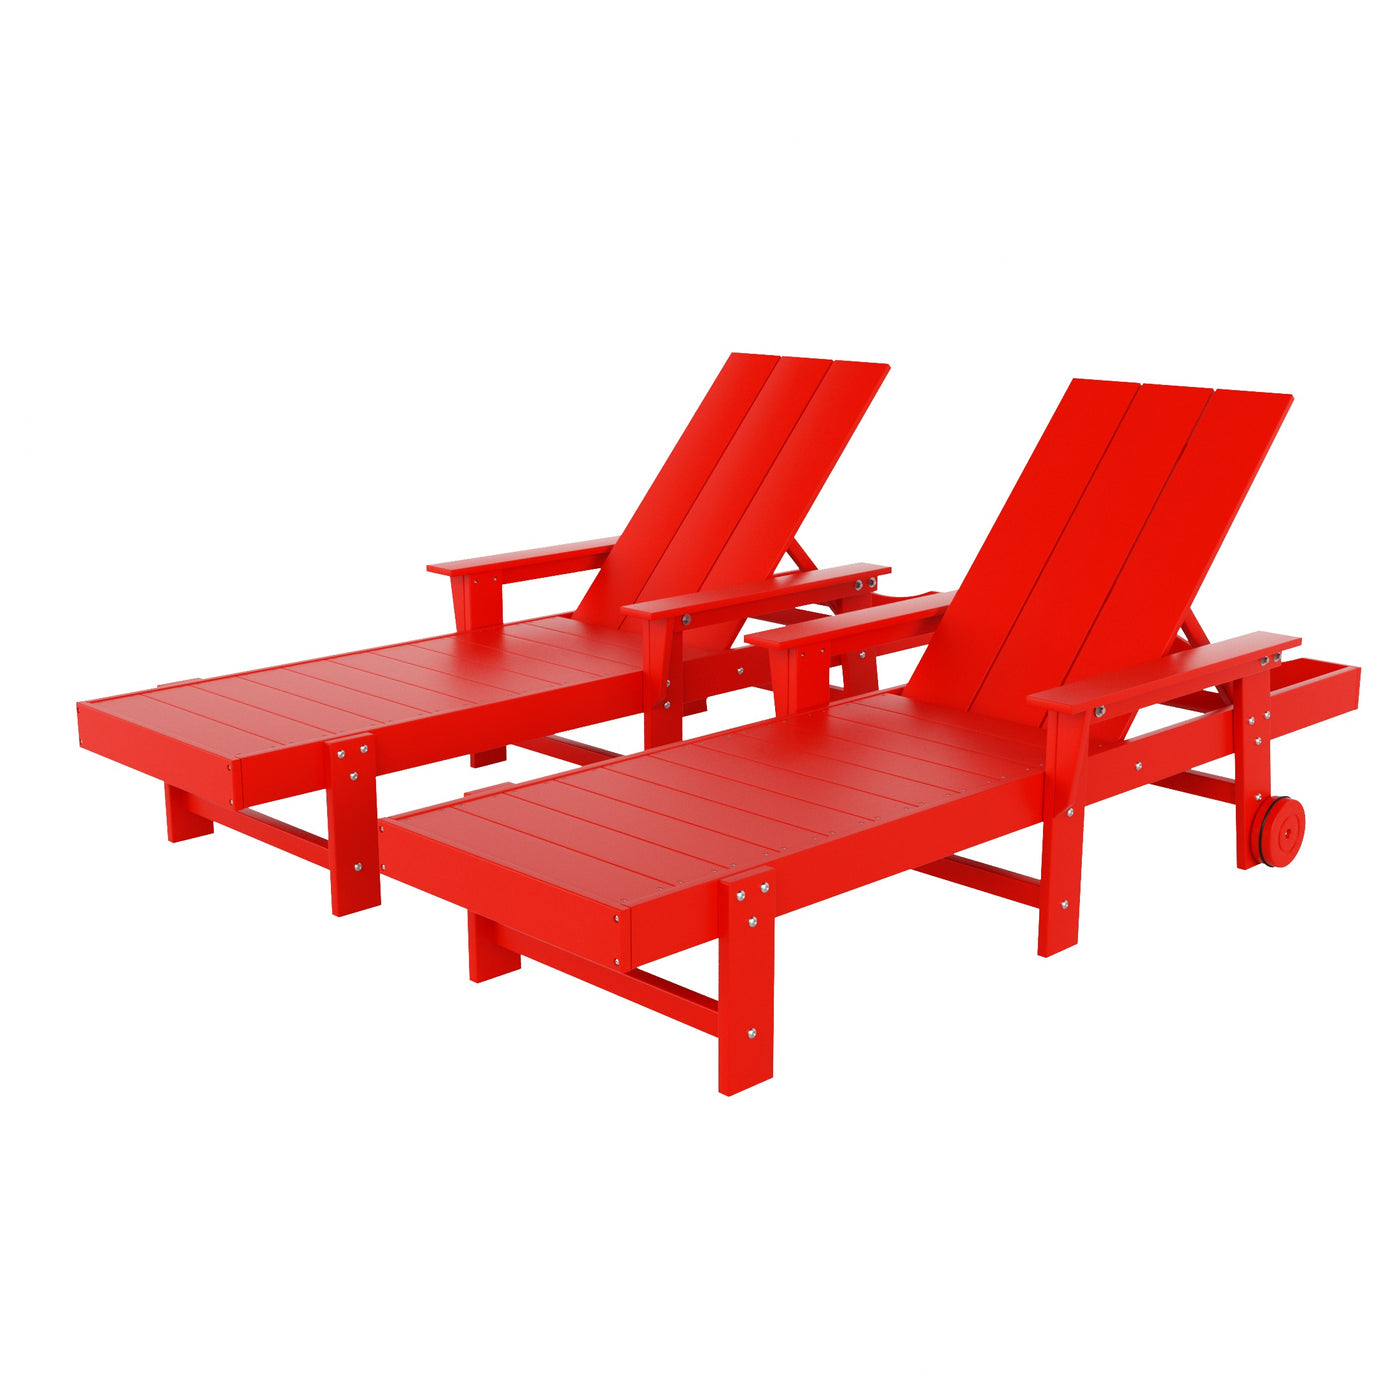 Ashore 2 Piece Reclining Chaise Lounge With Arms & Wheels